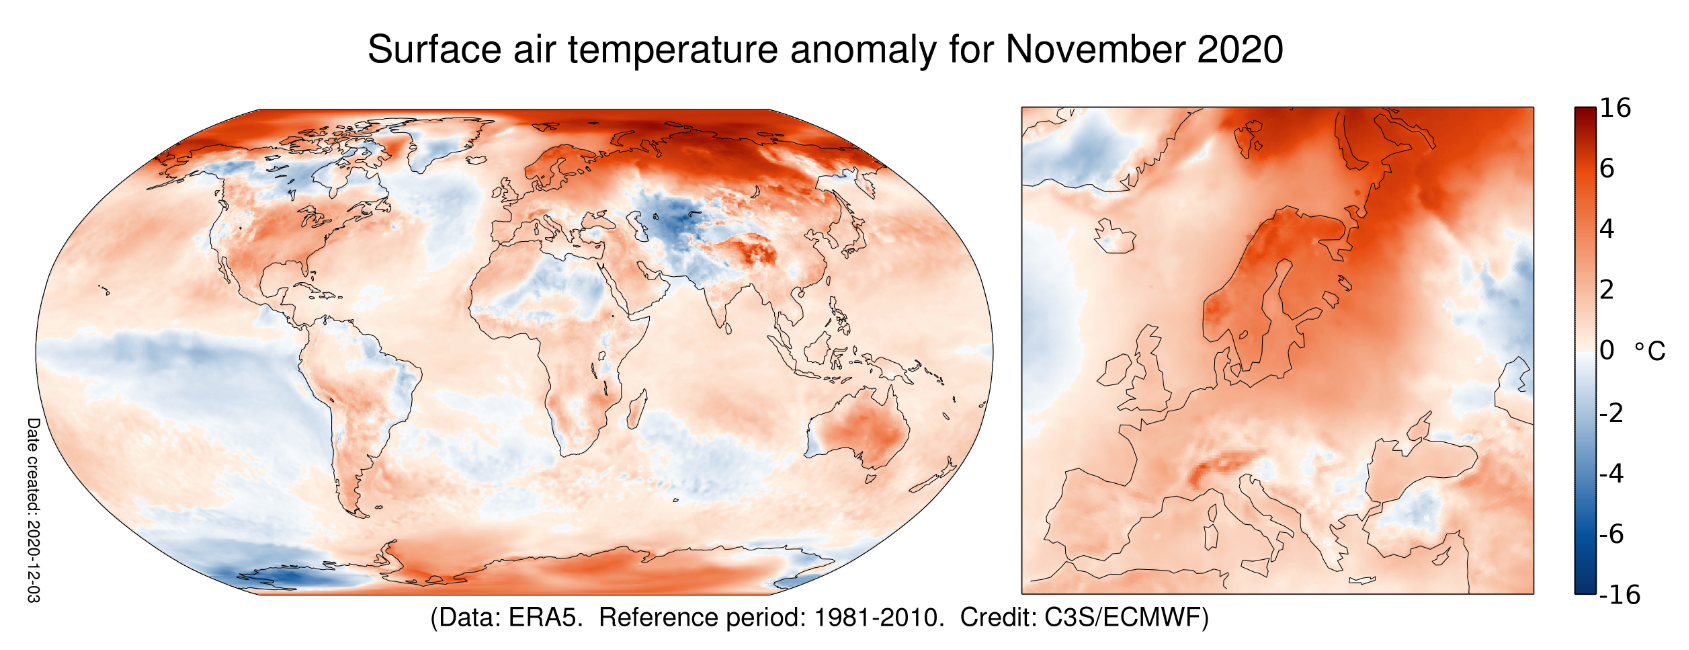 November 2020 was ‘exceptionally warm’, with sea ice at its second-lowest ever extent for the month